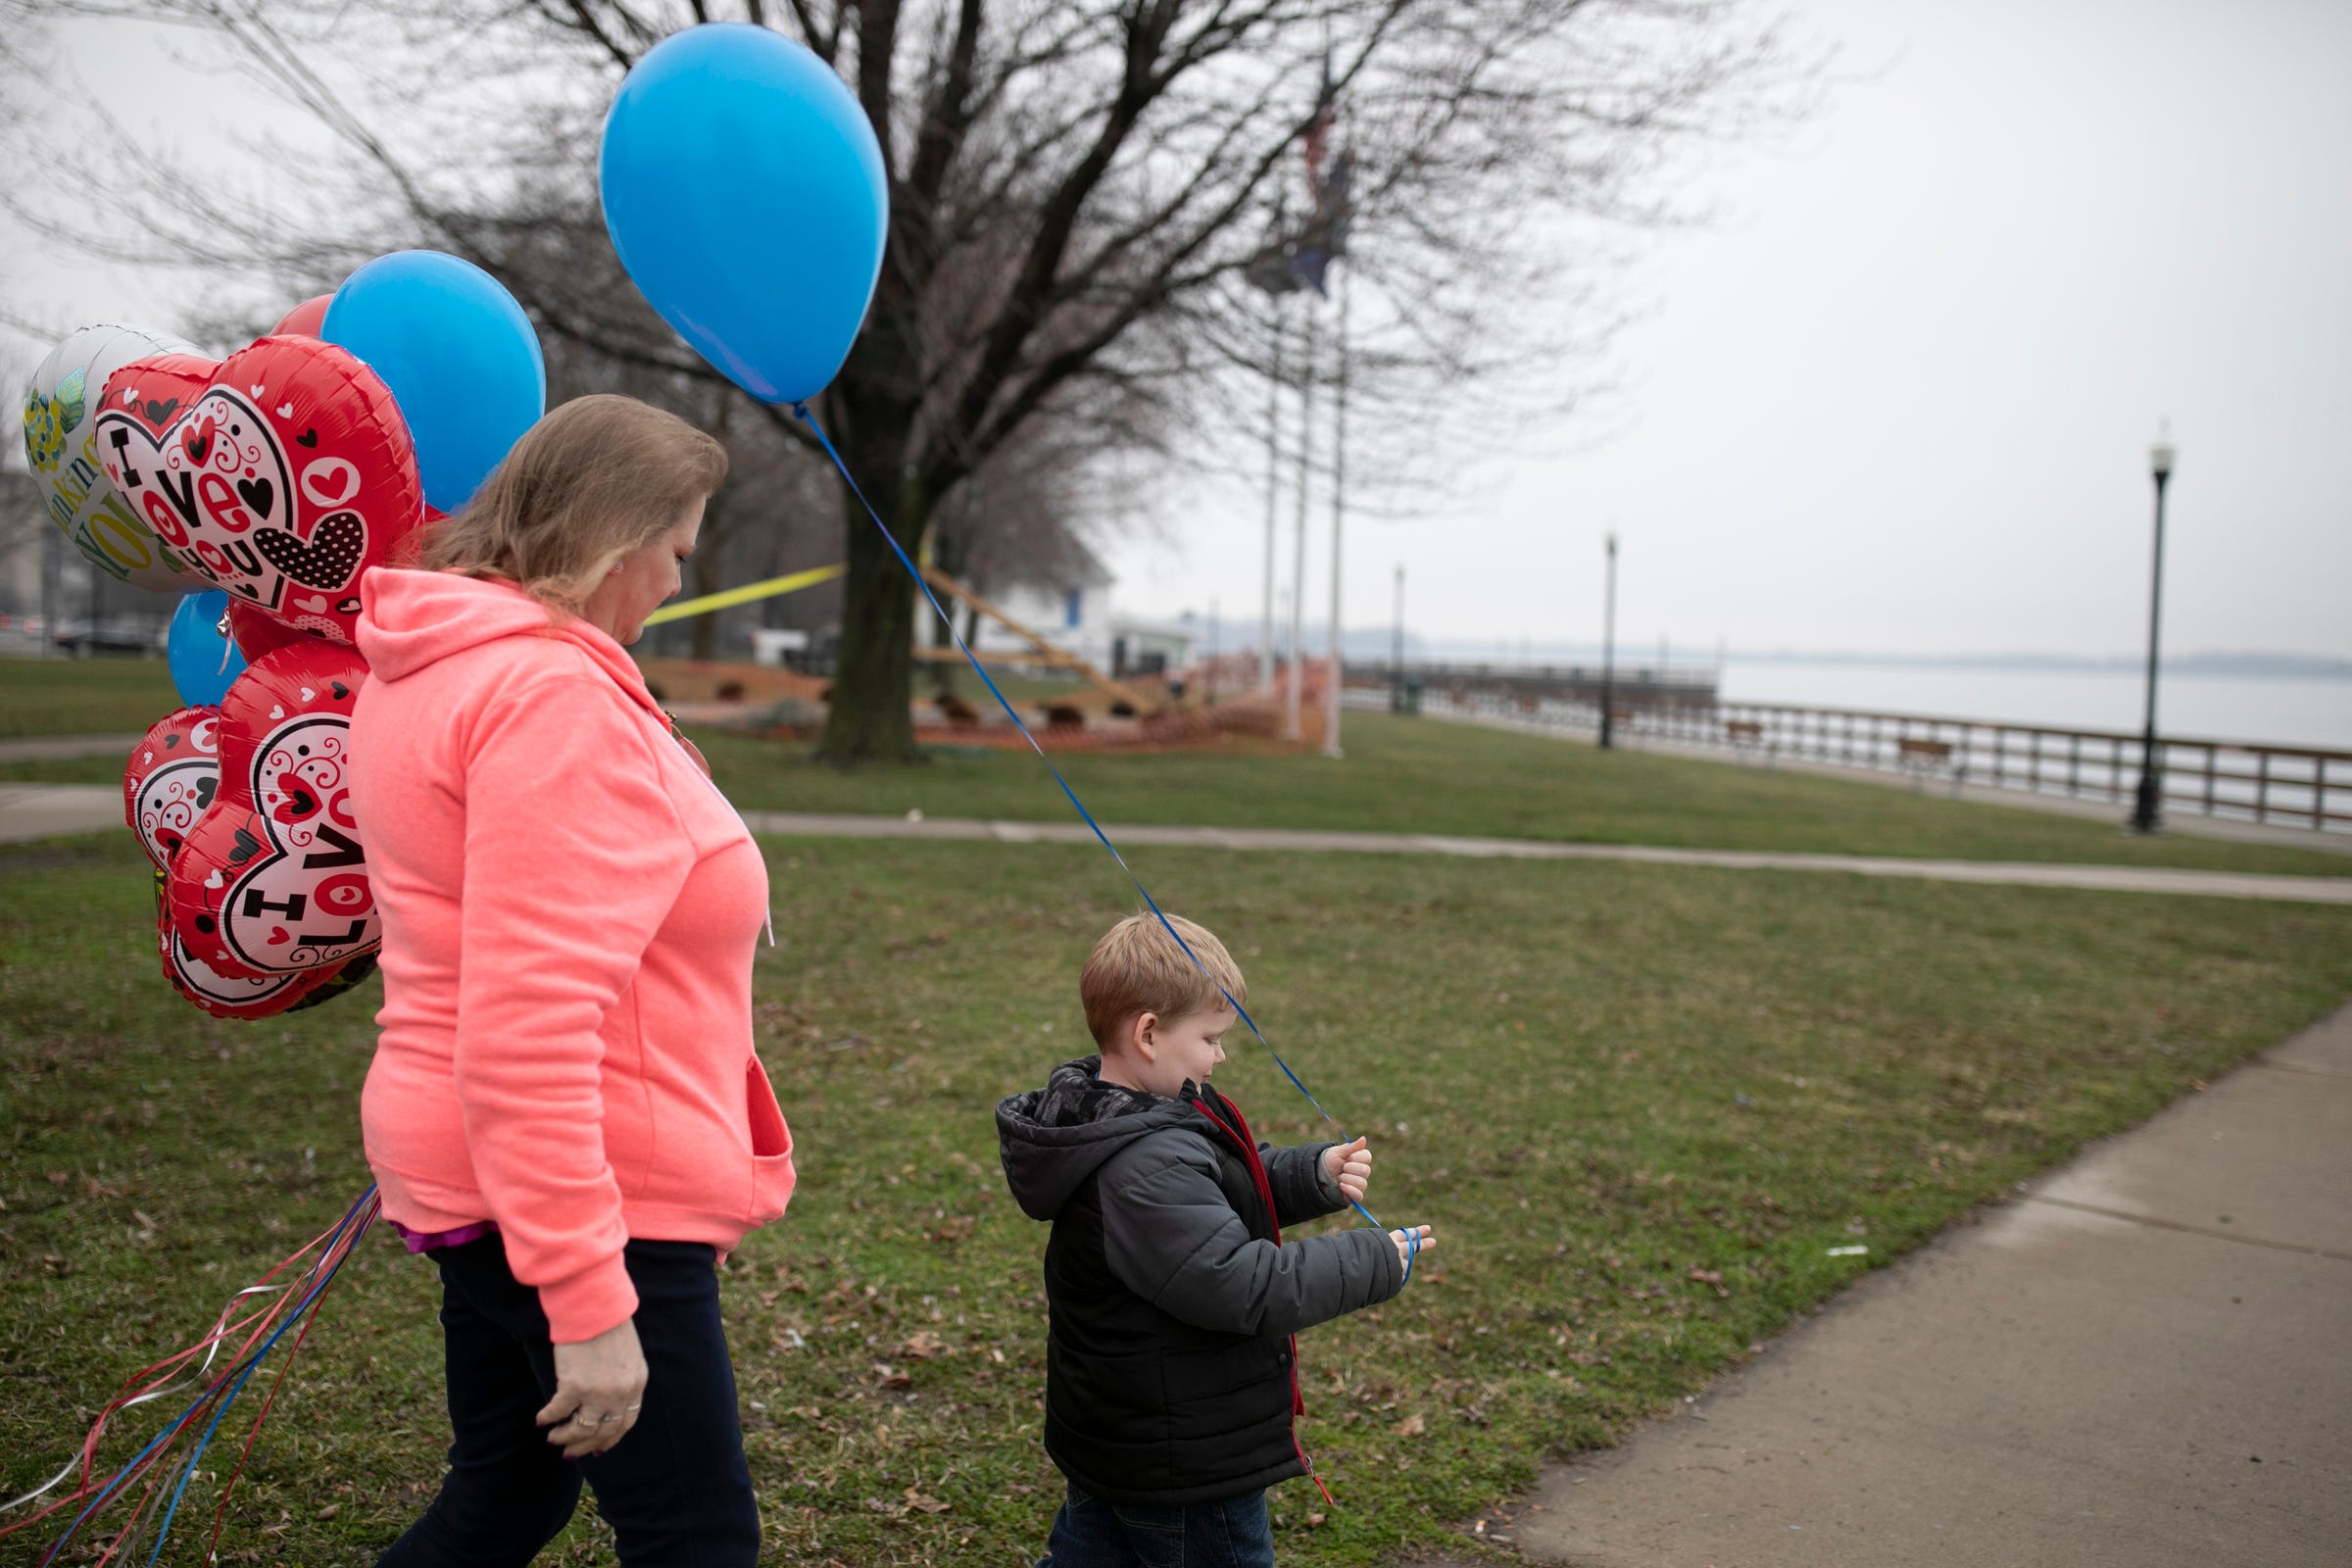 To mark the one-year anniversary of his death, Kathi Kuykendall and grandson Kamryn Olsen walk to the edge of the Detroit River in Wyandotte to release balloons in honor of Asa Kuykendall.